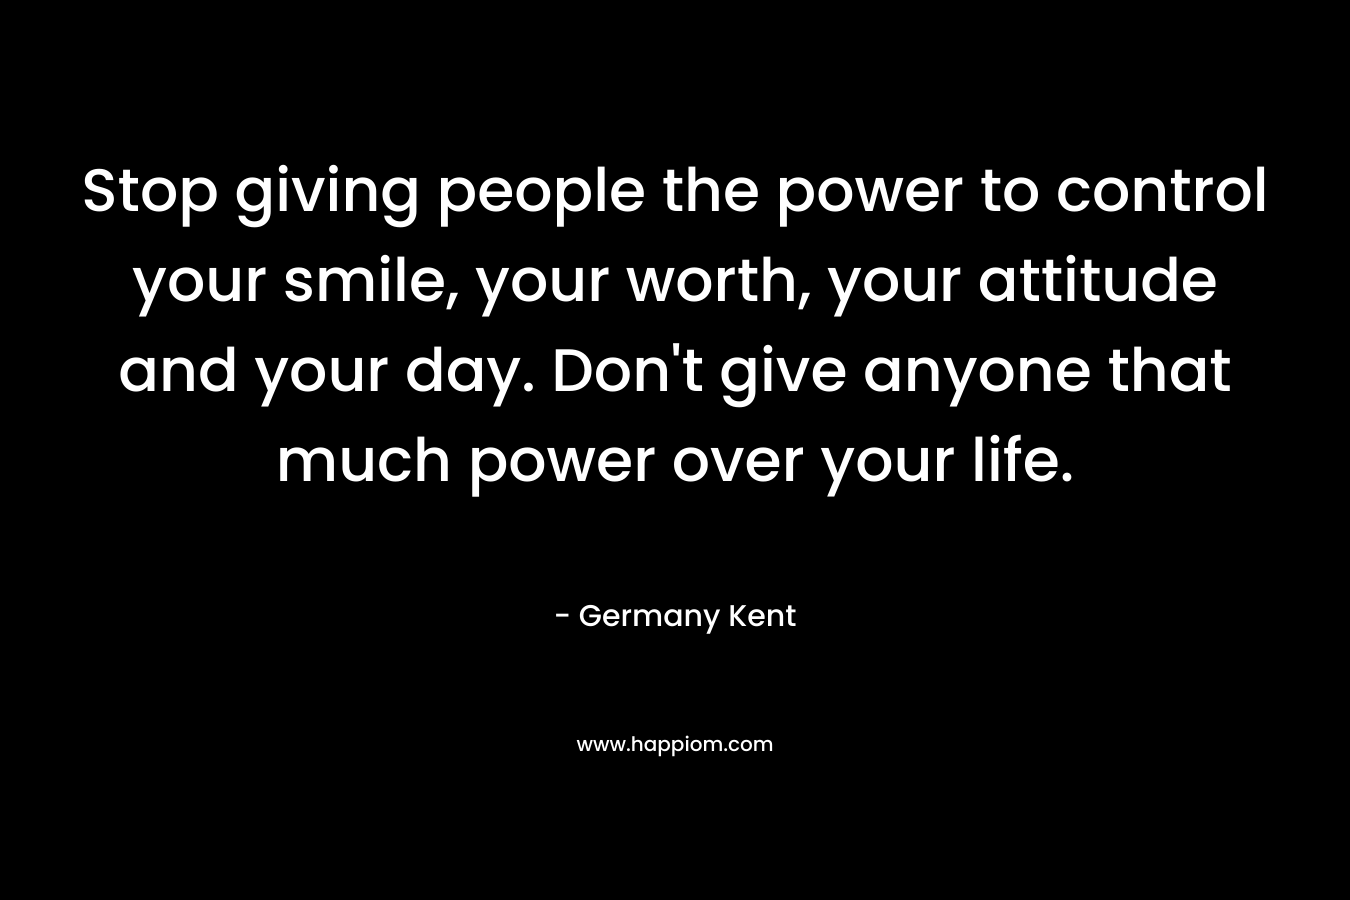 Stop giving people the power to control your smile, your worth, your attitude and your day. Don't give anyone that much power over your life.